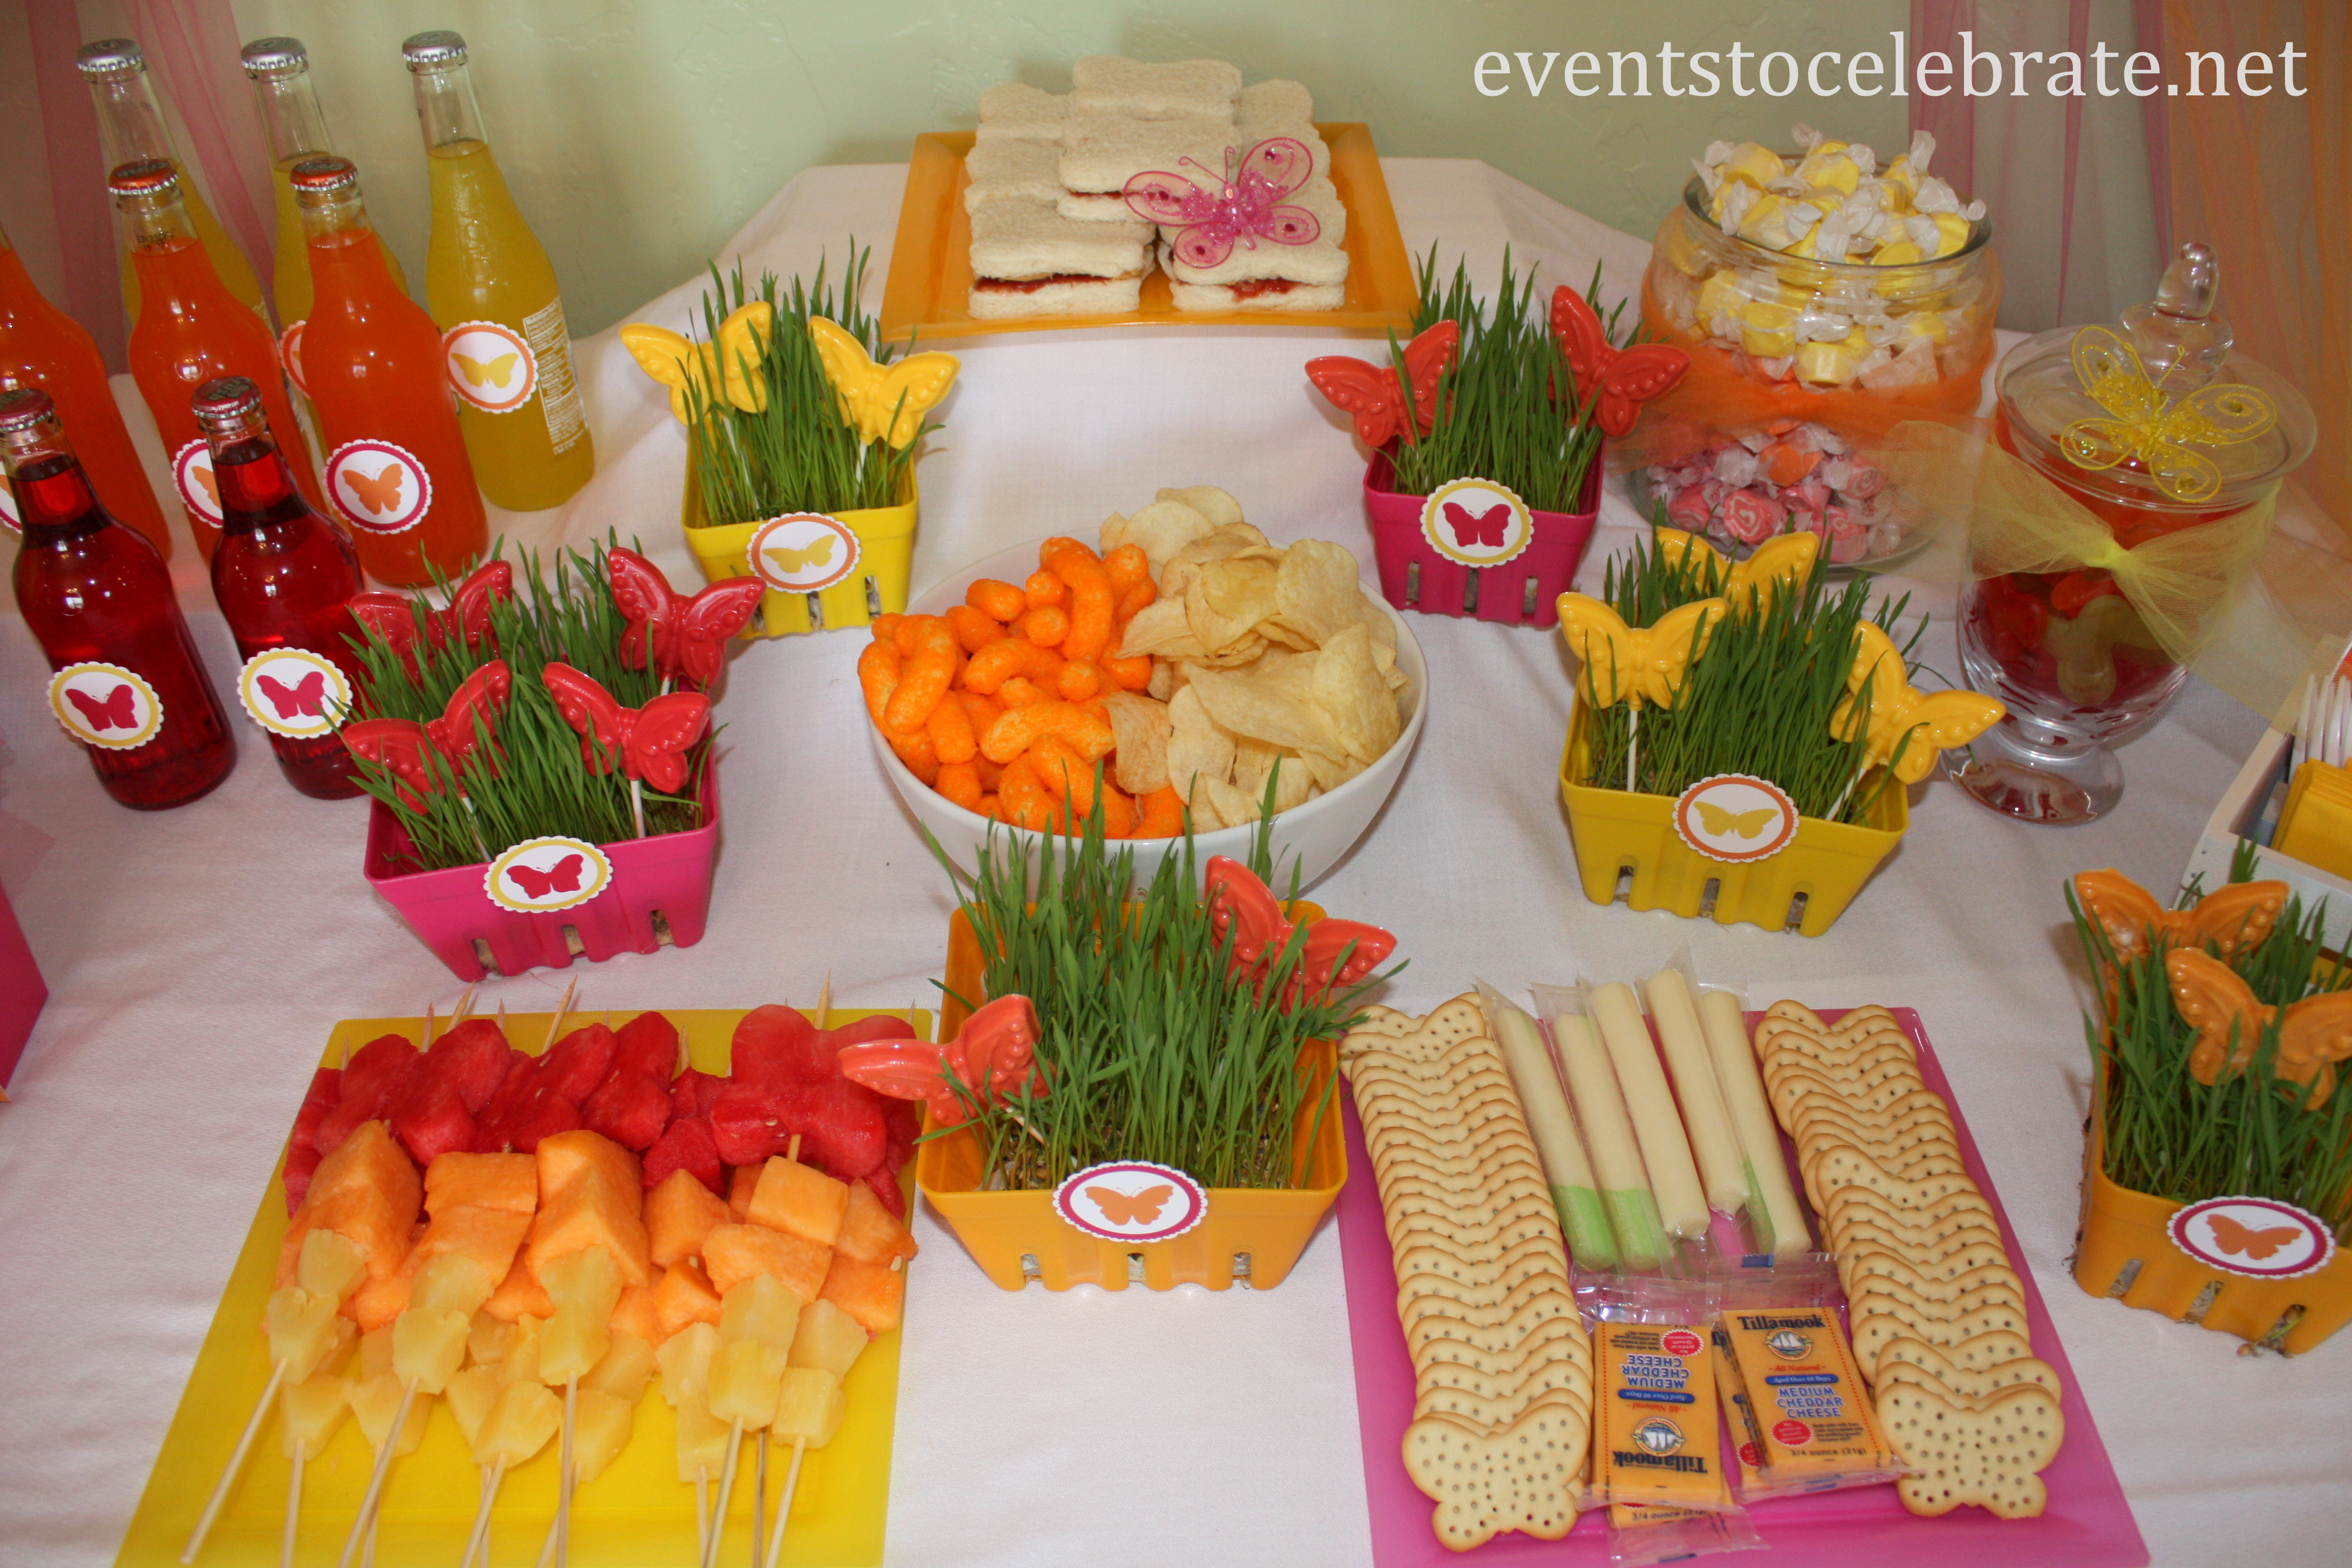 Birthday Party Meal Ideas
 centerpieces Archives events to CELEBRATE